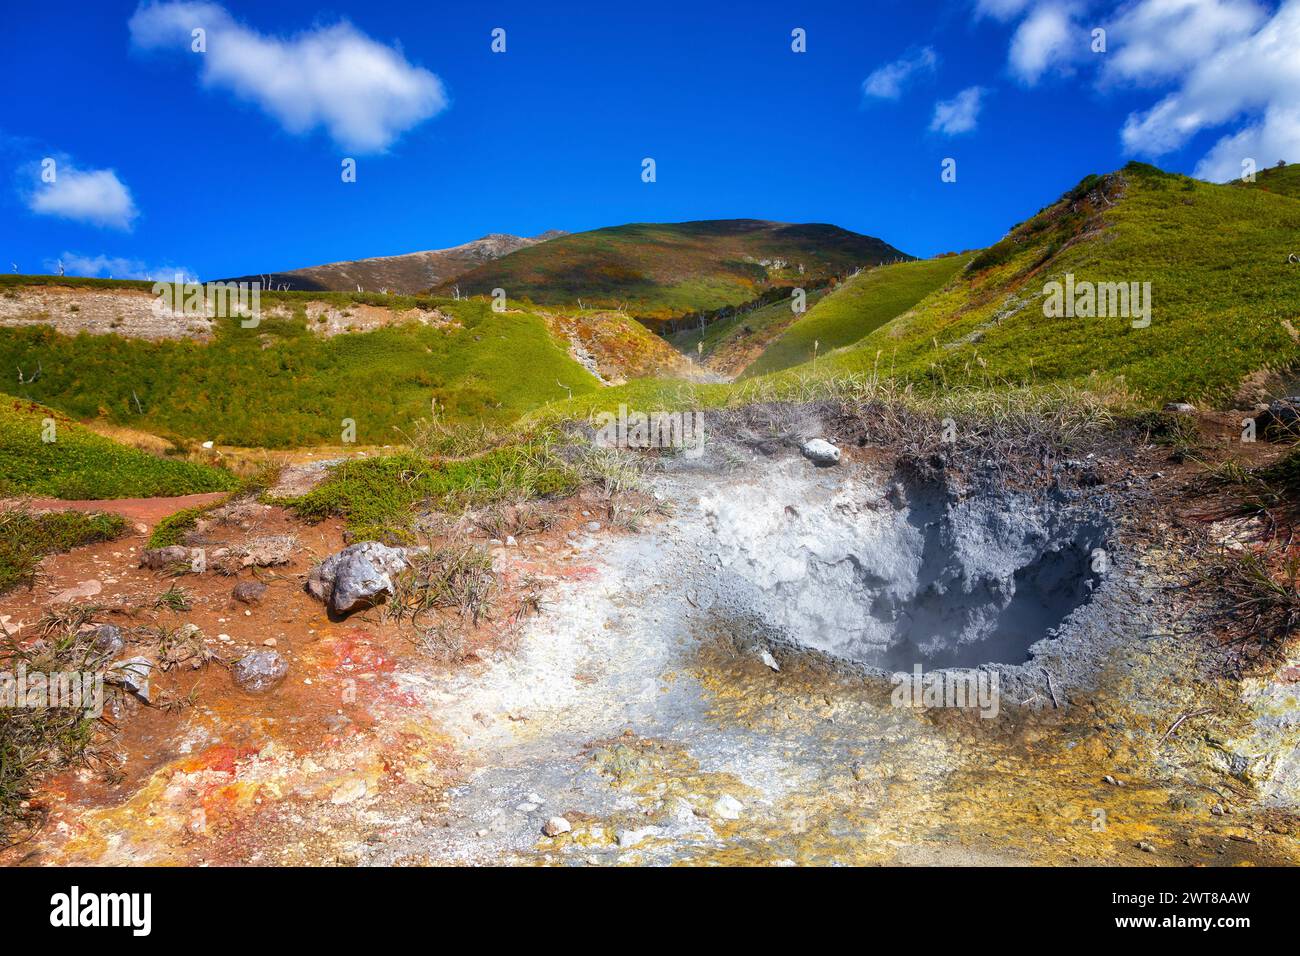 Craters with boiling volcanic mud. Iturup, Kuril Islands. Russia Stock Photo